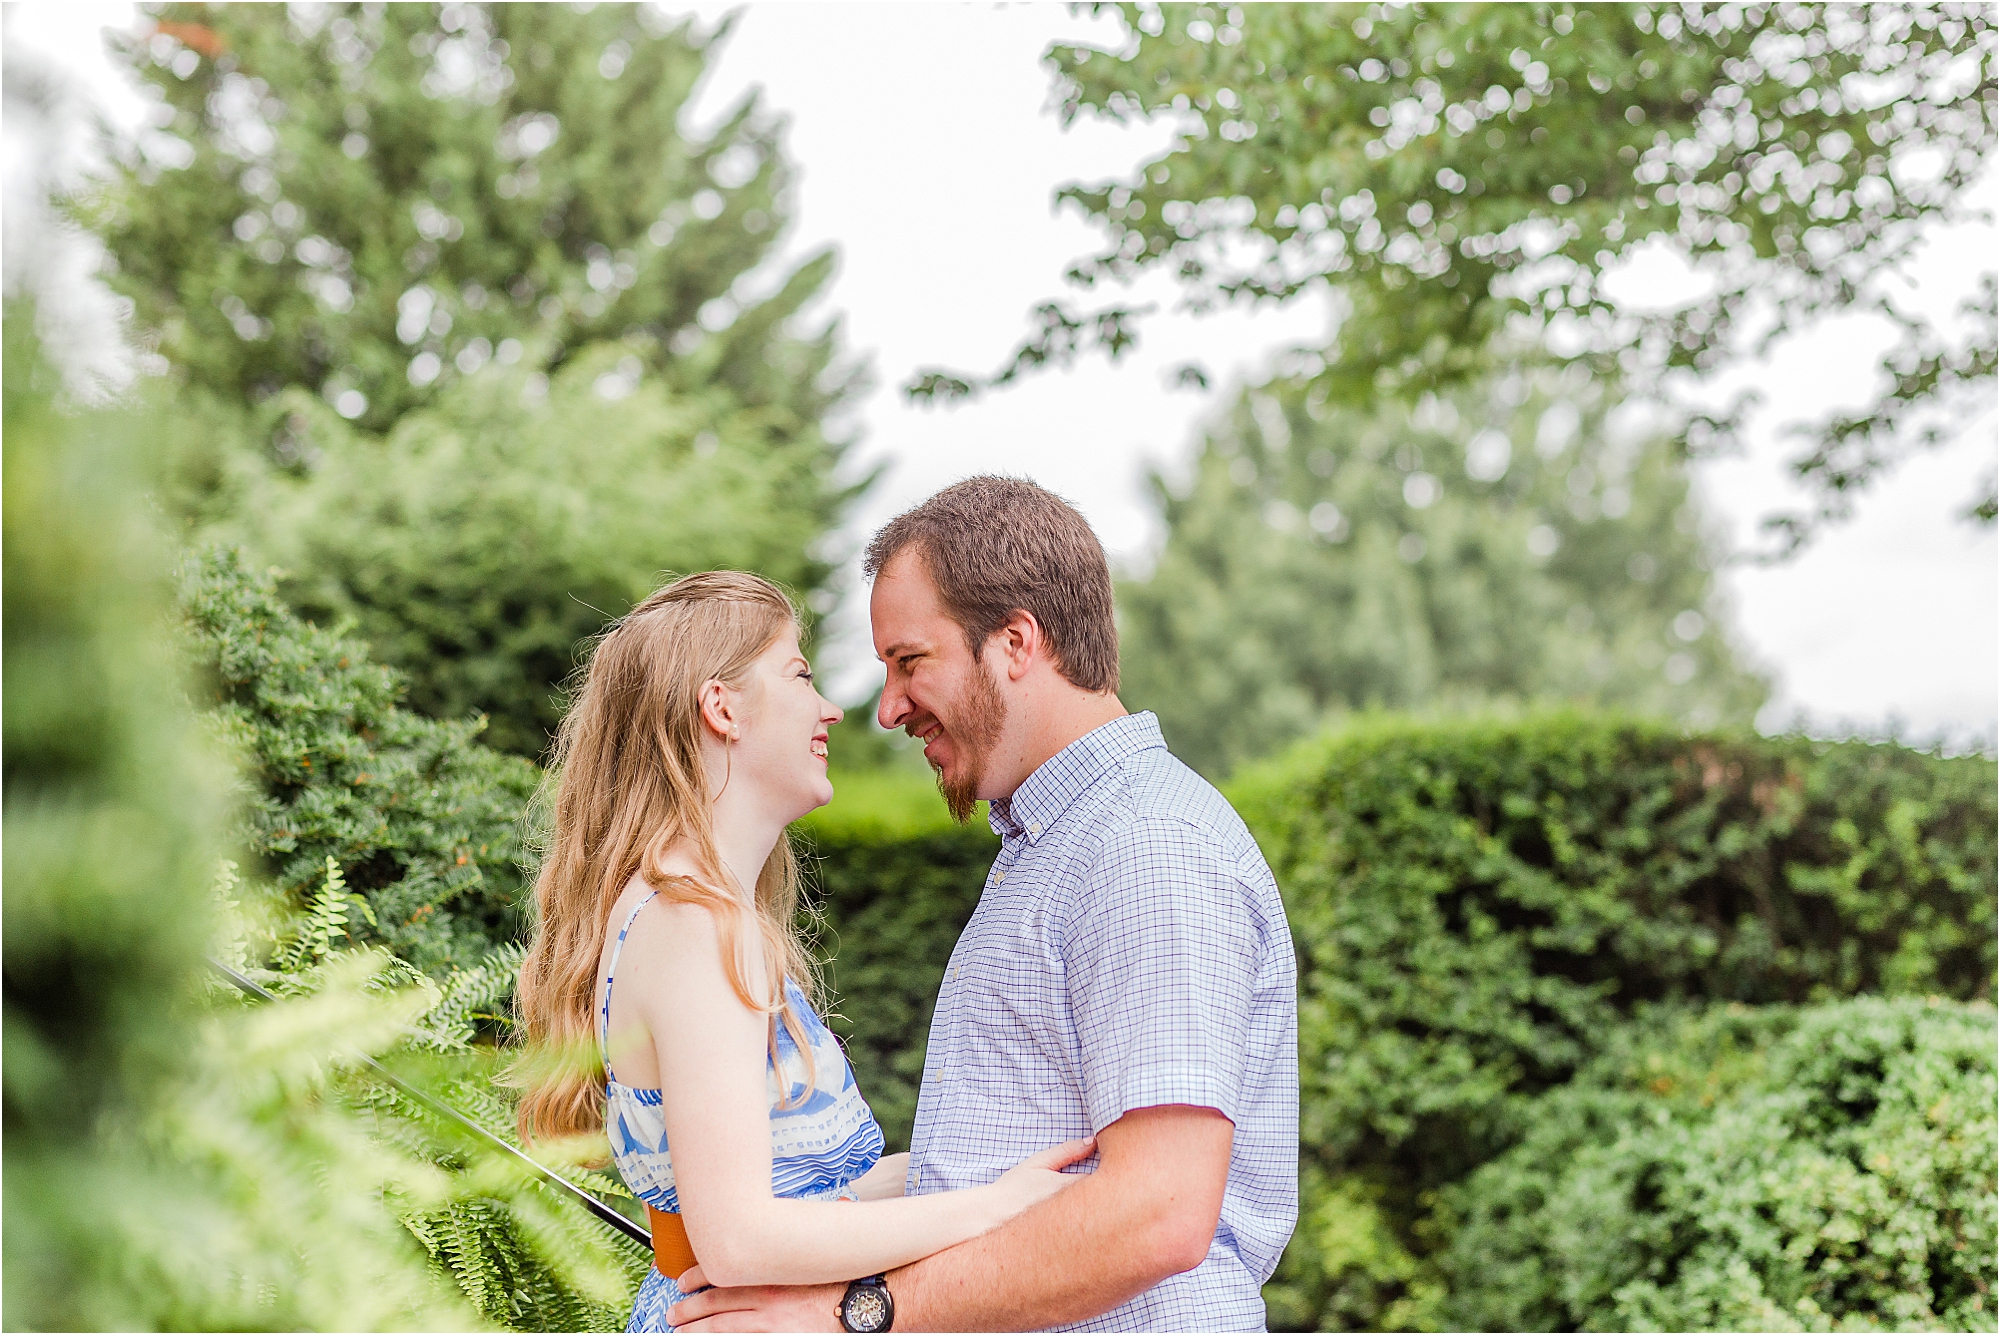 Engagement session at The Maridor in Roanoke, Virginia.